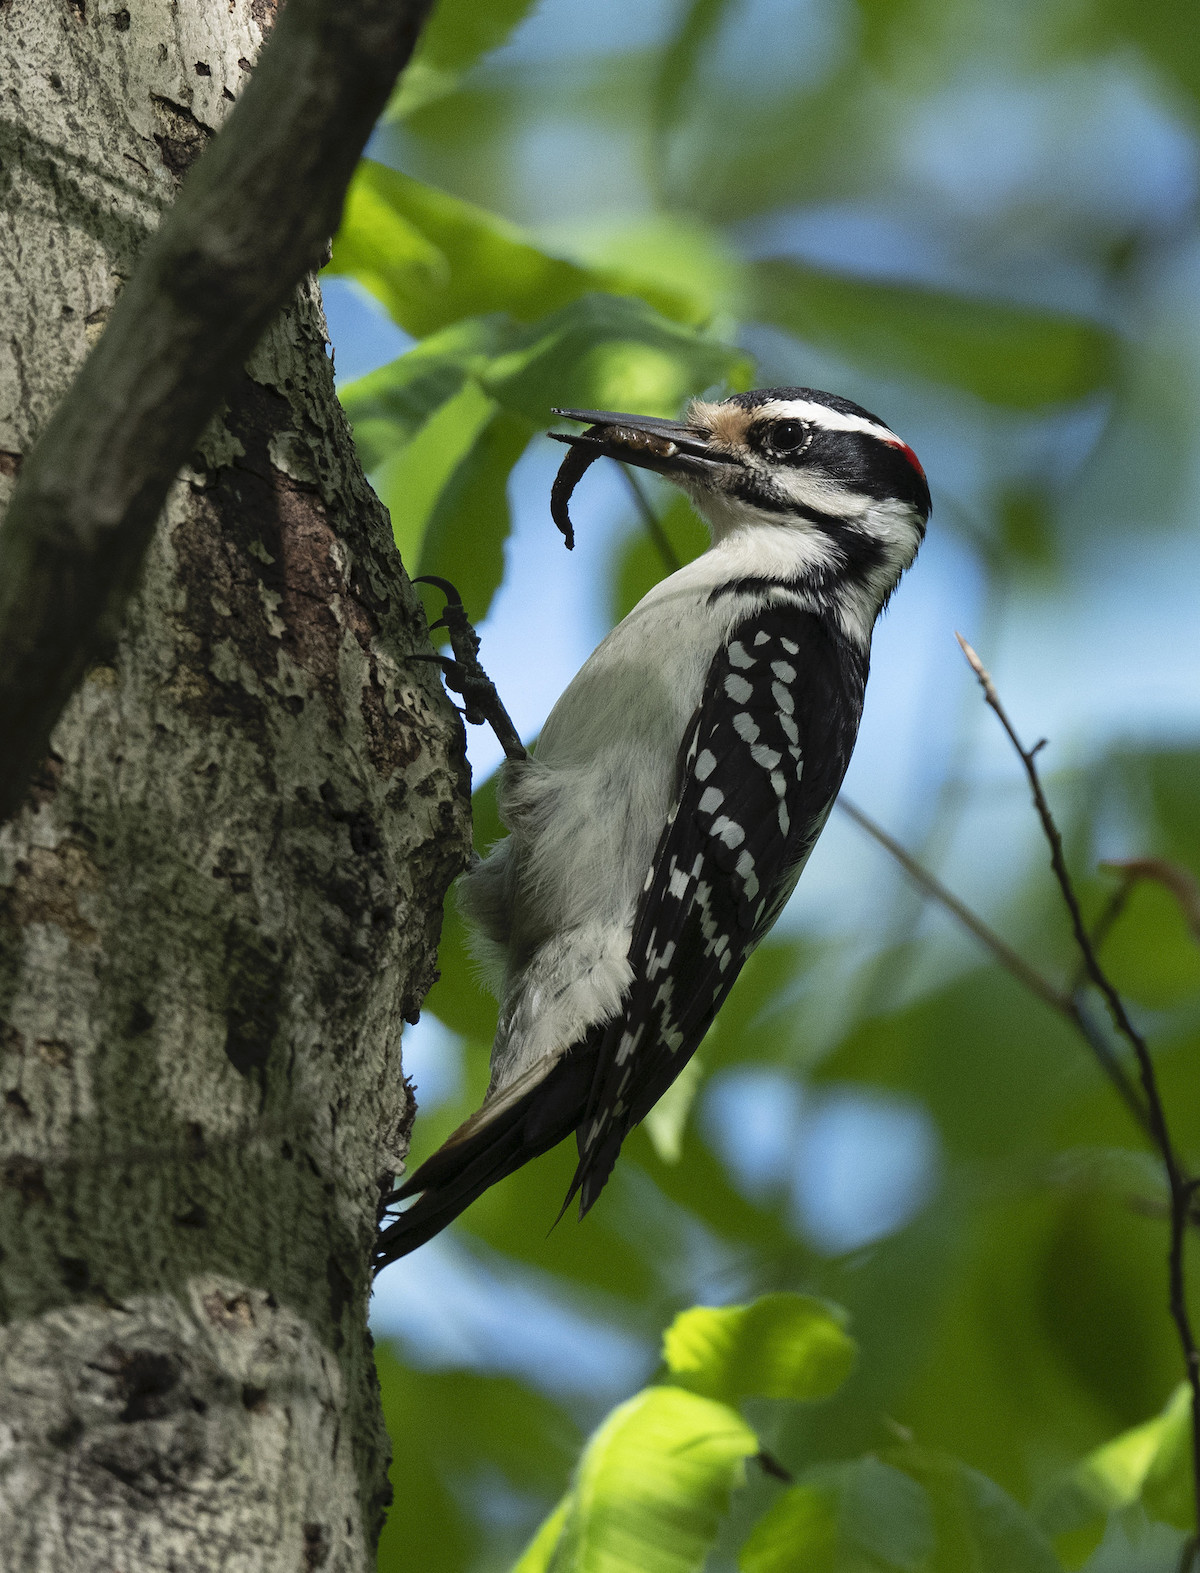 A hairy woodpecker walking up a tree in upstate New York